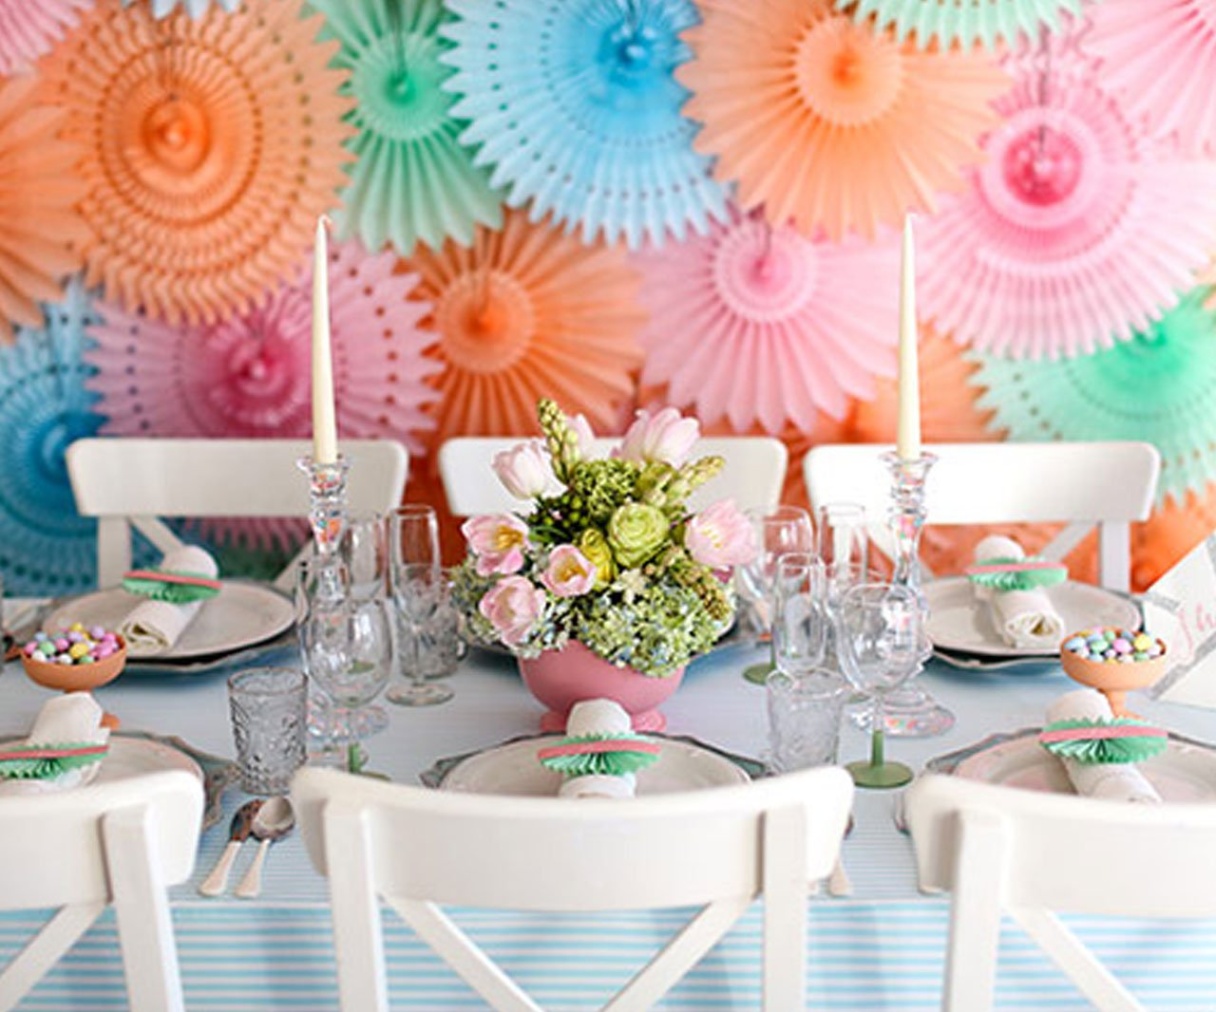 decoration for party Niche Utama Home  Tips for Decorating Your Next Party